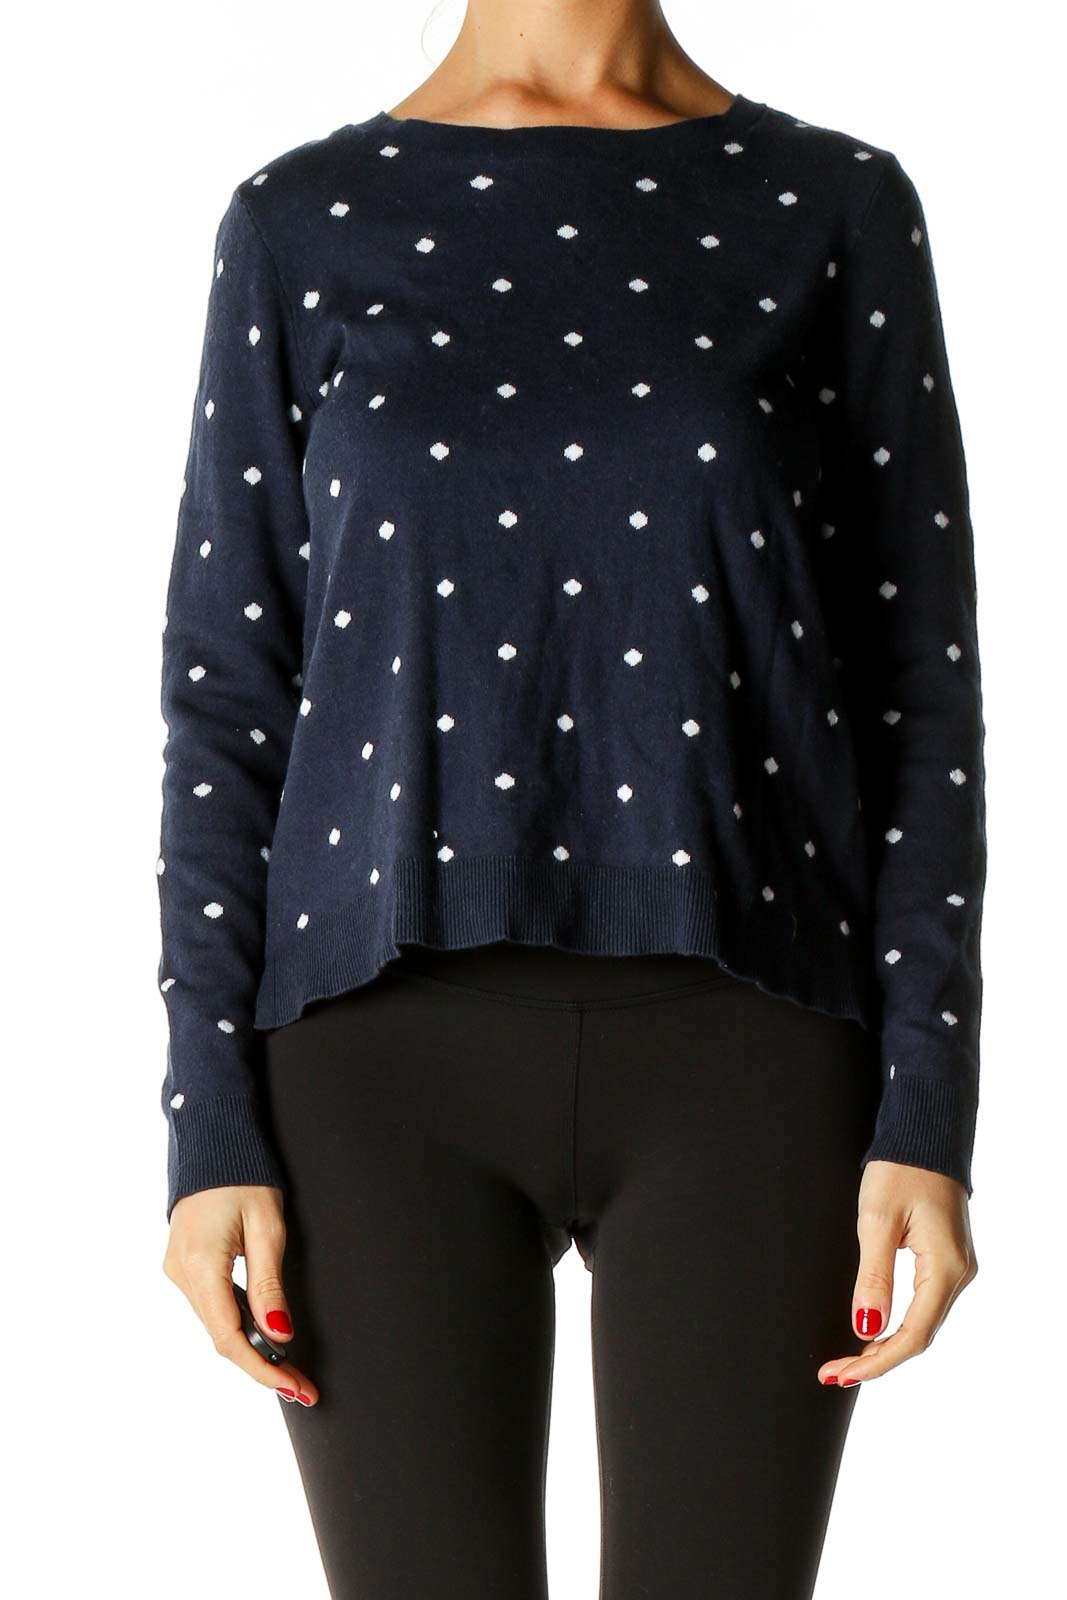 Blue Polka Dot All Day Wear Sweater Front